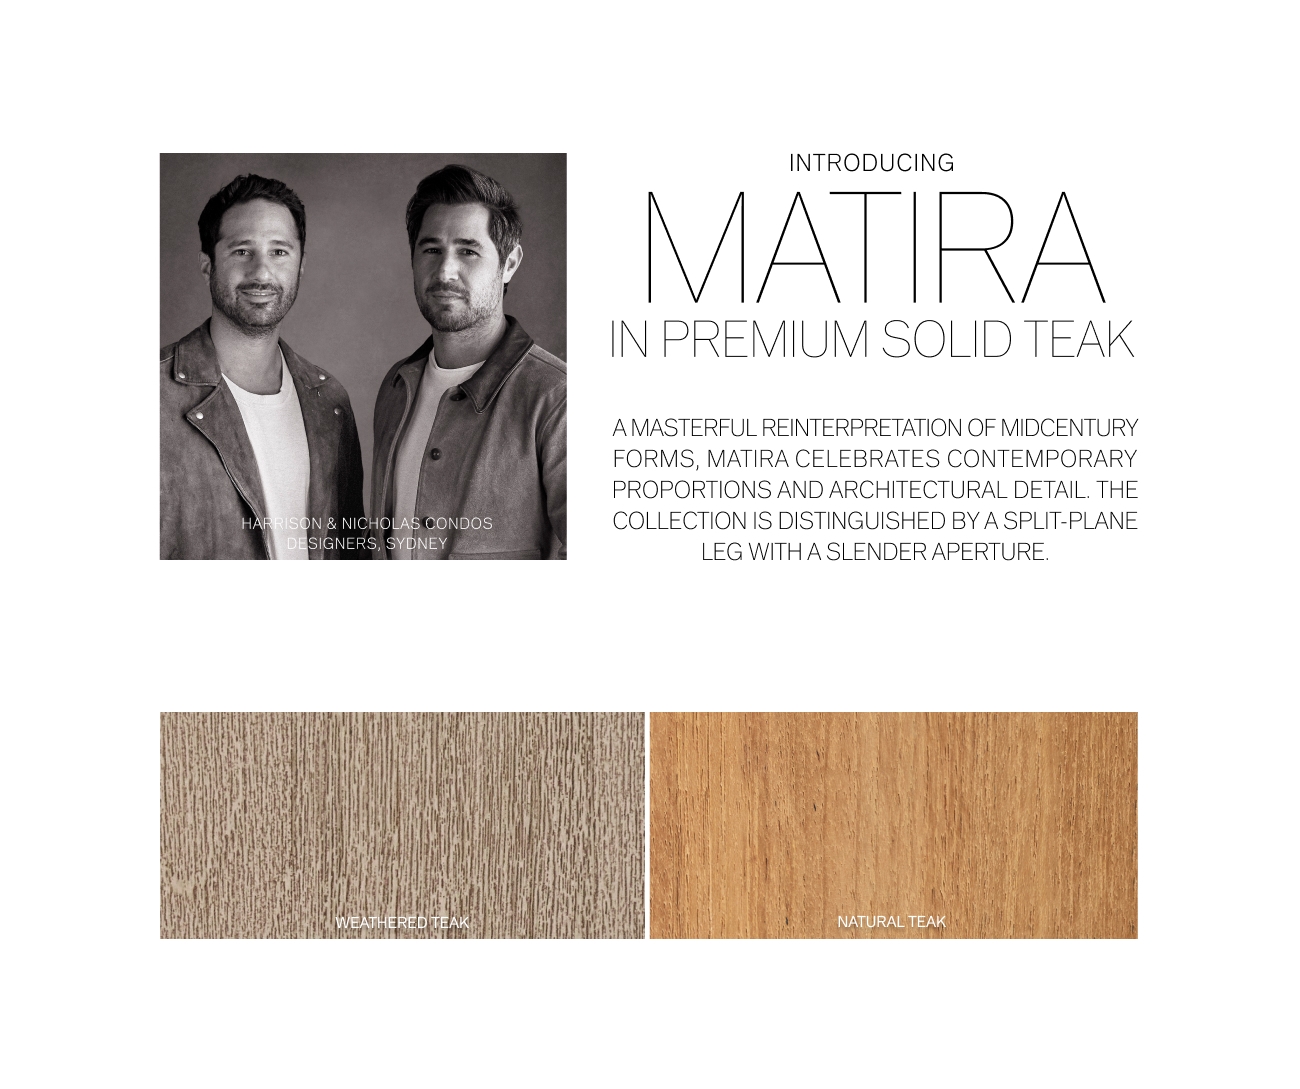 INTRODUCING MATTRA IN PREMIUM SOLID TEAK AMASTERFUL REINTERPRETATION OF MIDCENTURY FORMS, MATIRA CELEBRATES CONTEMPORARY PROPORTIONS AND ARCHITECTURAL DETAIL. THE COLLECTION IS DISTINGUISHED BY A SPLIT-PLANE LEG WITH A SLENDER APERTURE 